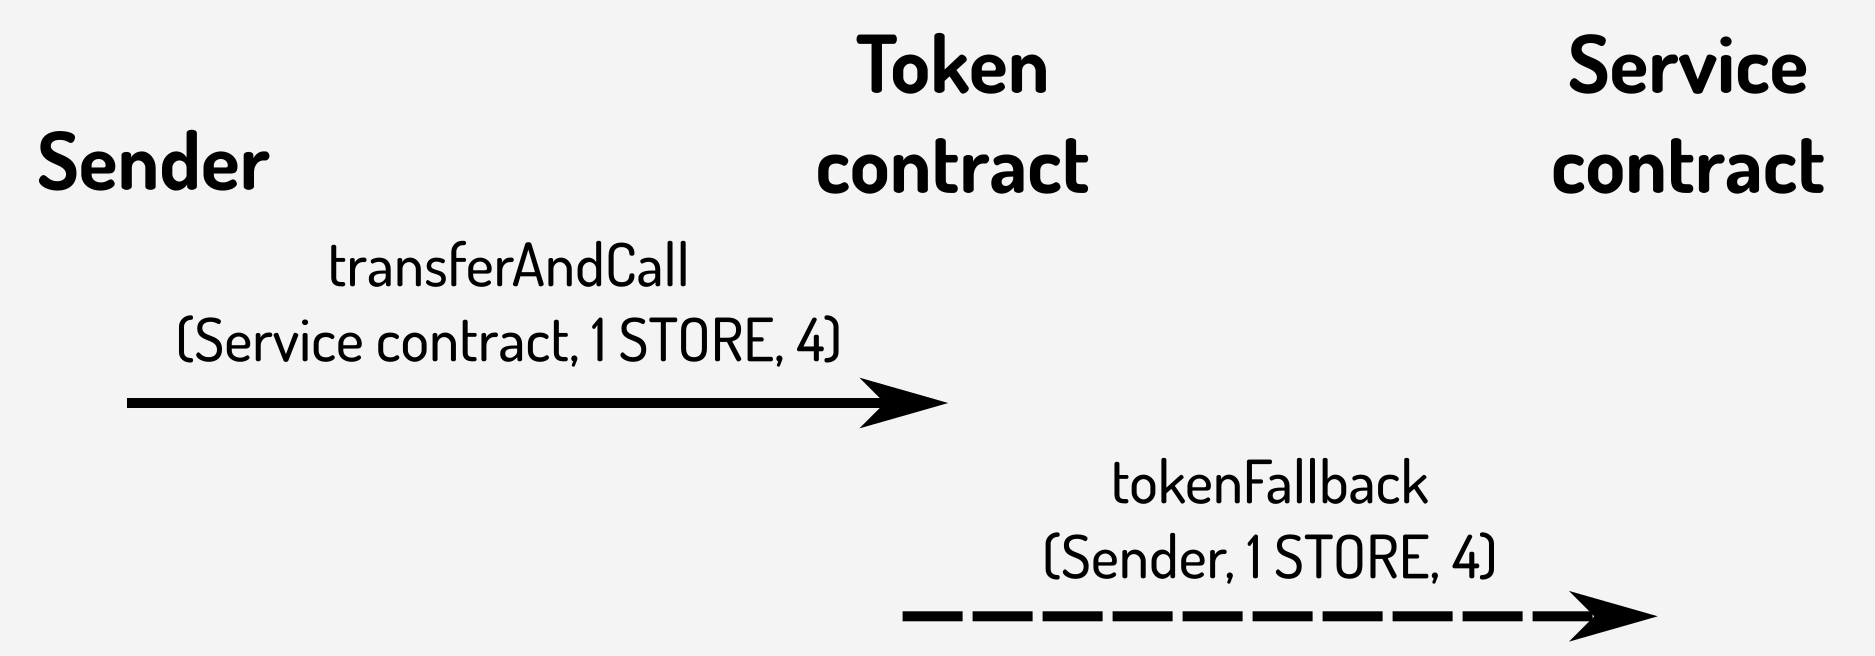 Using transferAndCall() to pay for a service contract function with a token